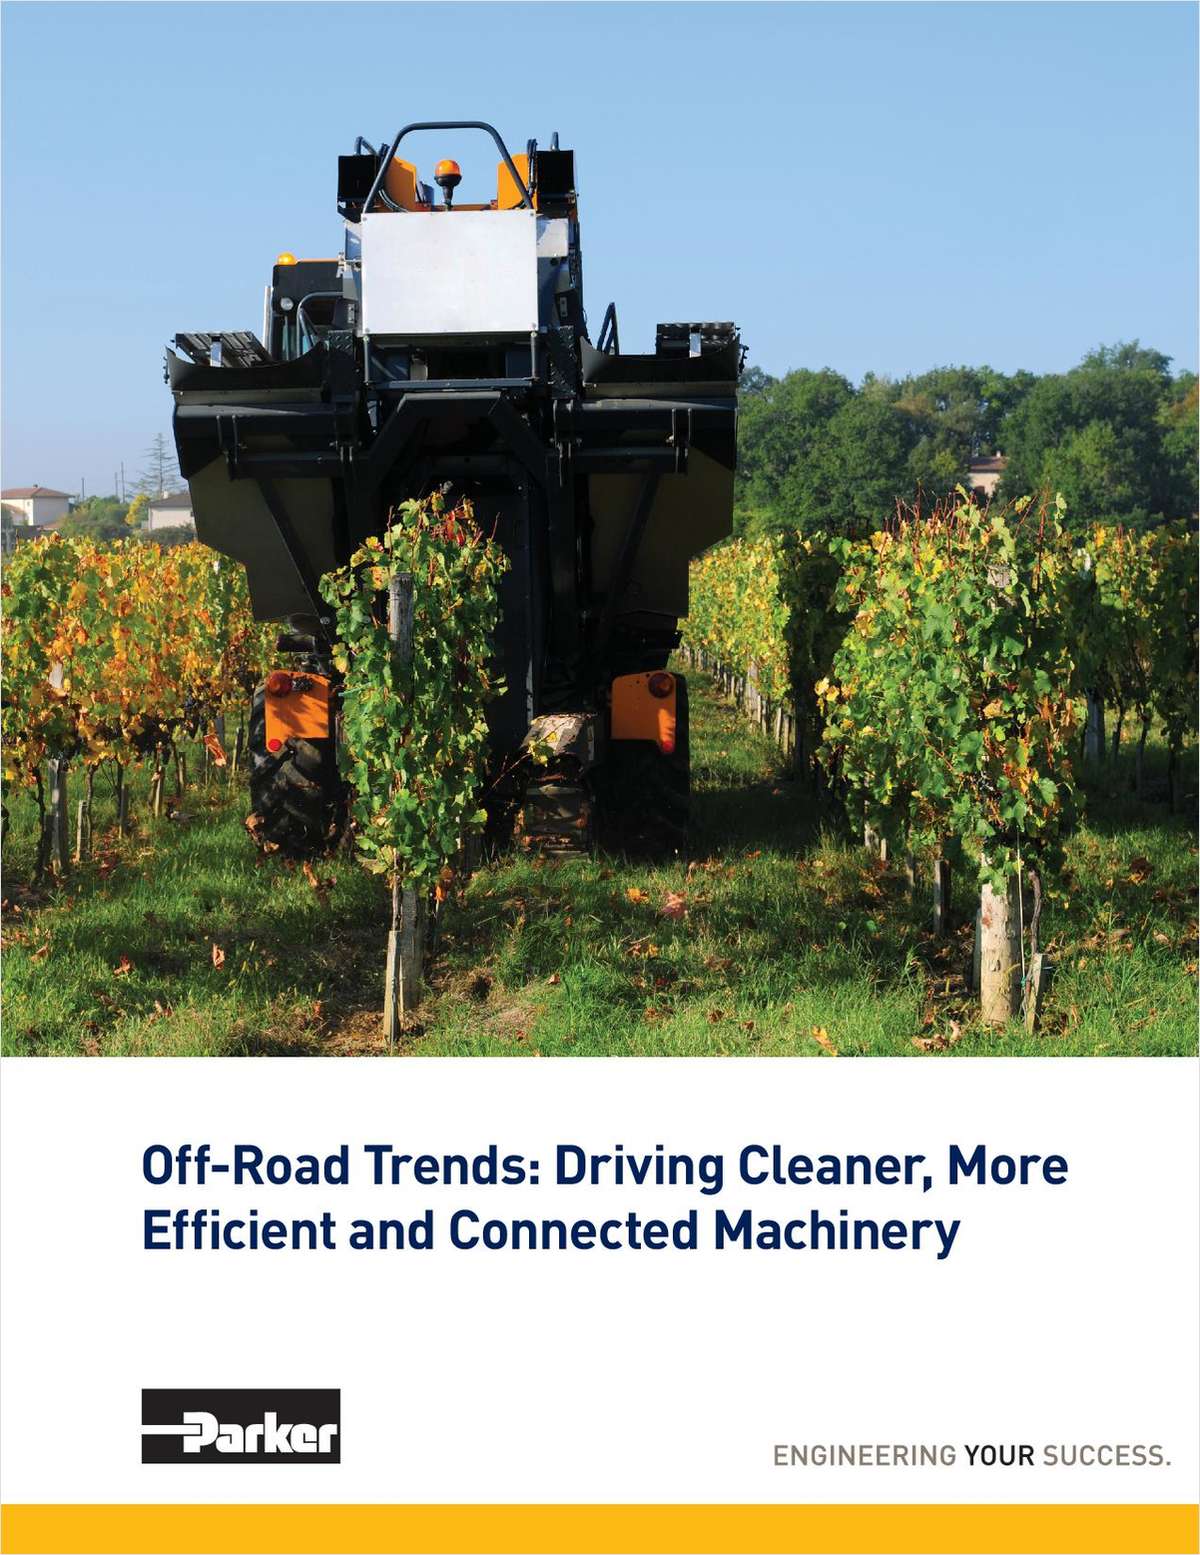 Off-Road Trends: Driving Cleaner, More Efficient and Connected Machinery